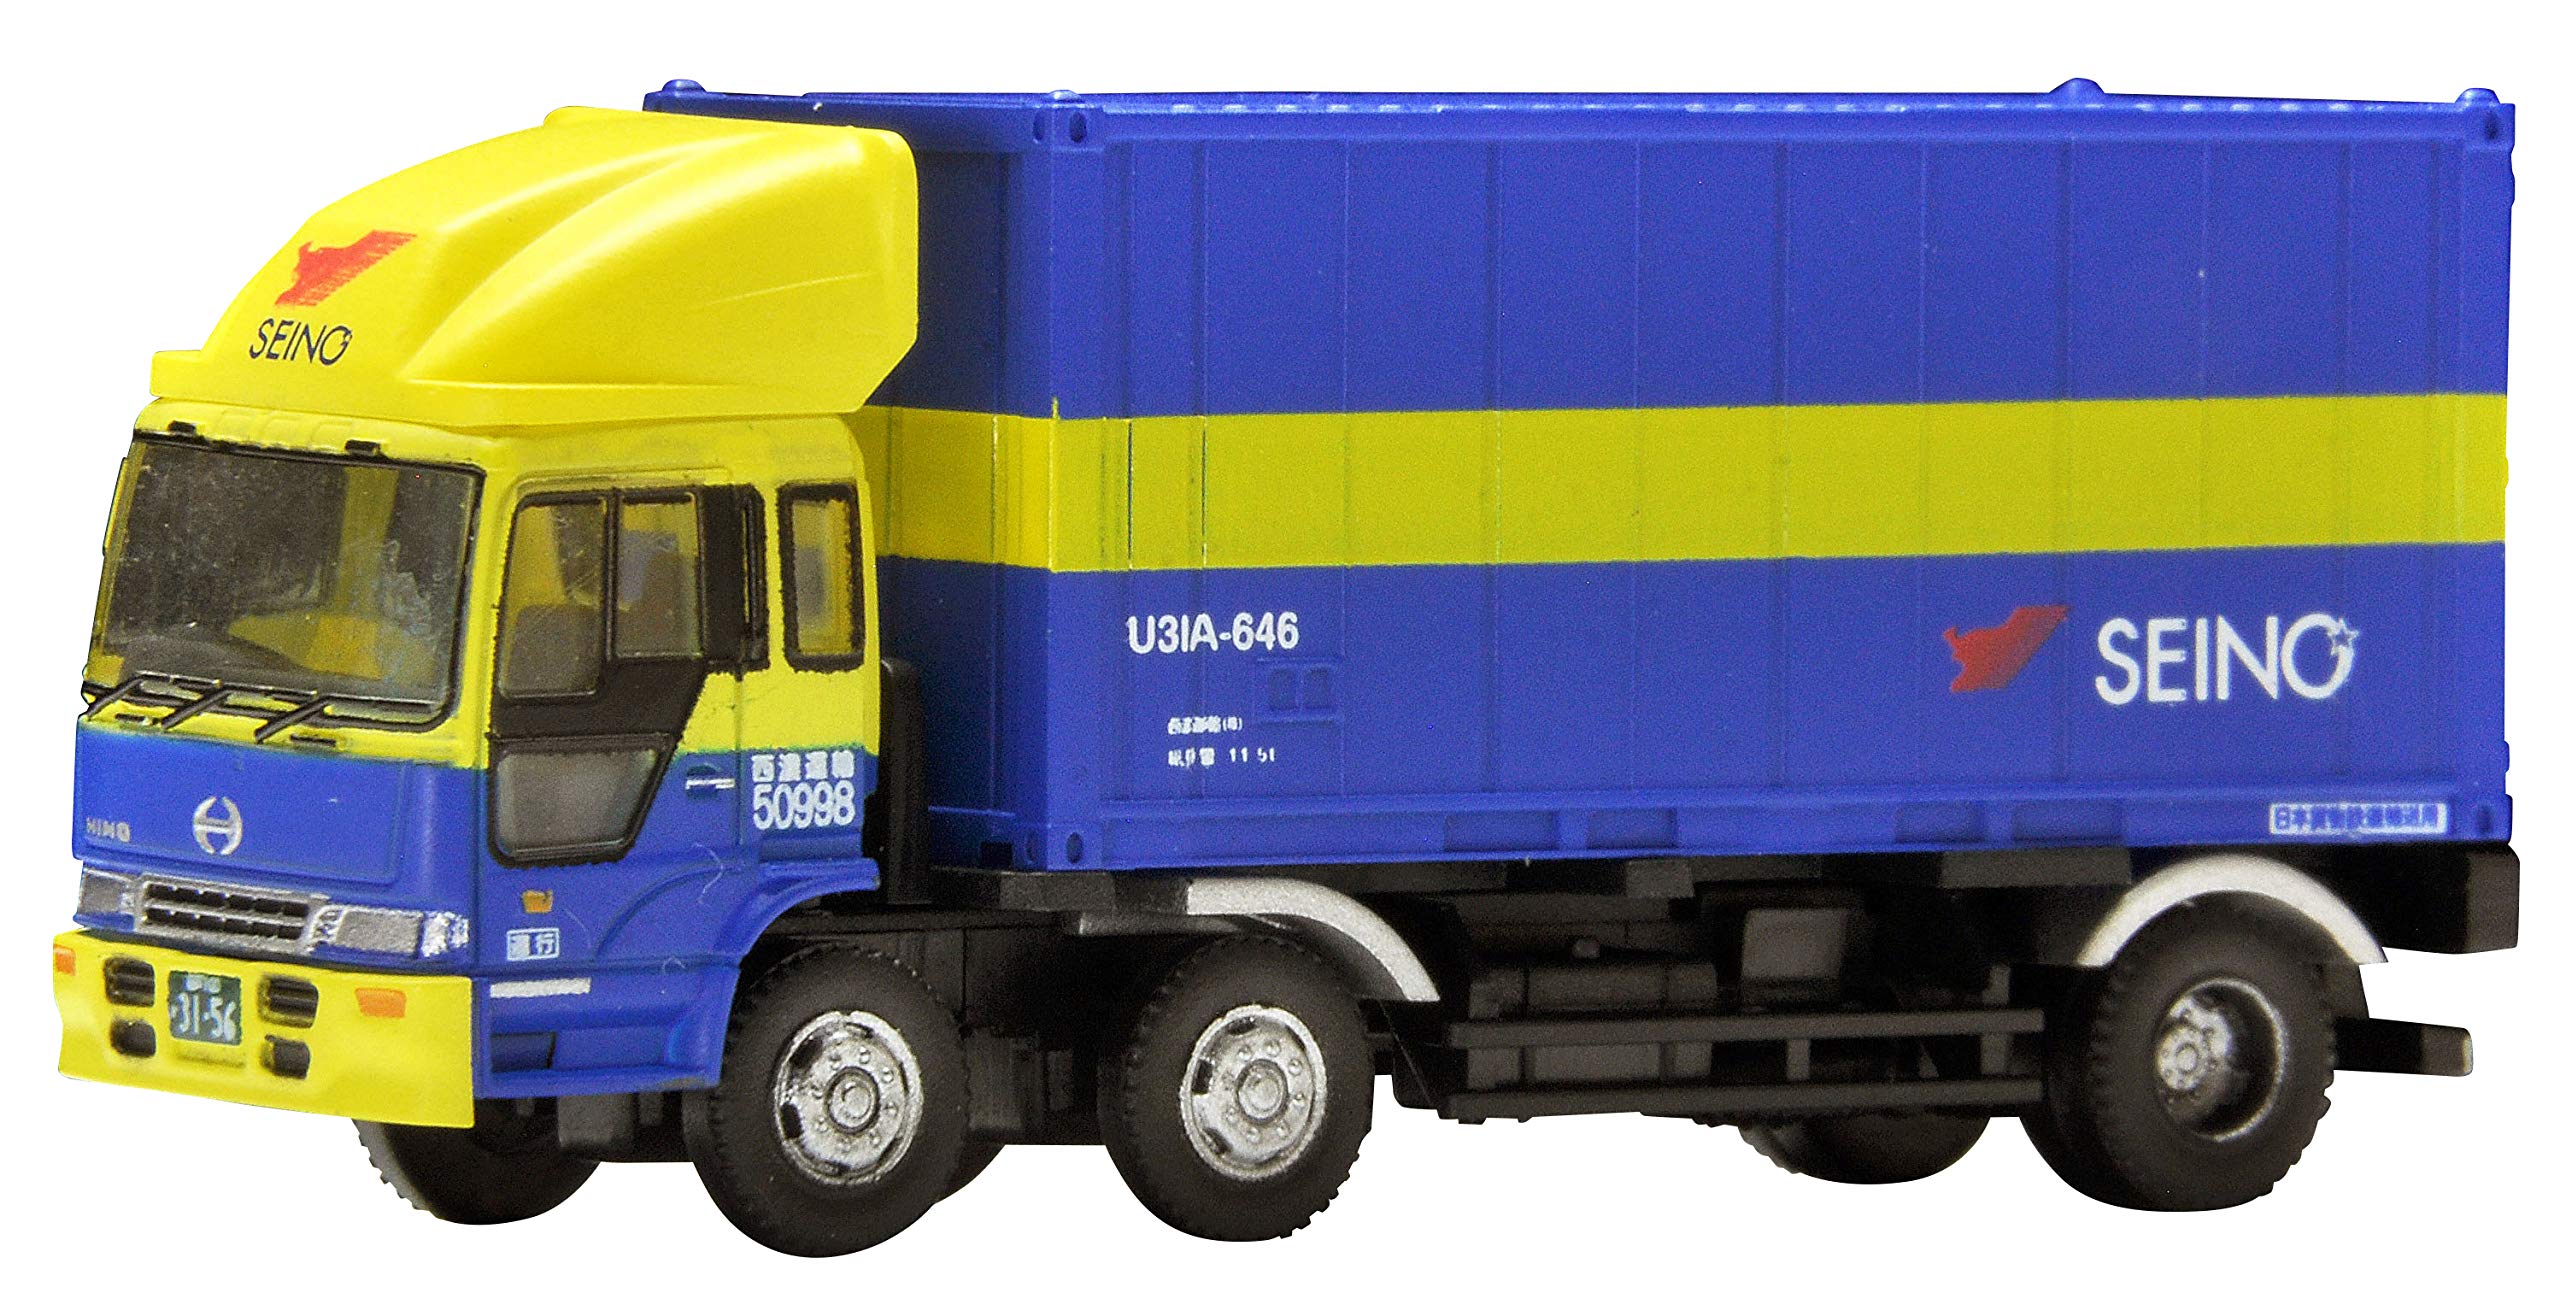 Tomytec Truck Collection Tracolle 12th Box - Limited First Order Diorama Supplies